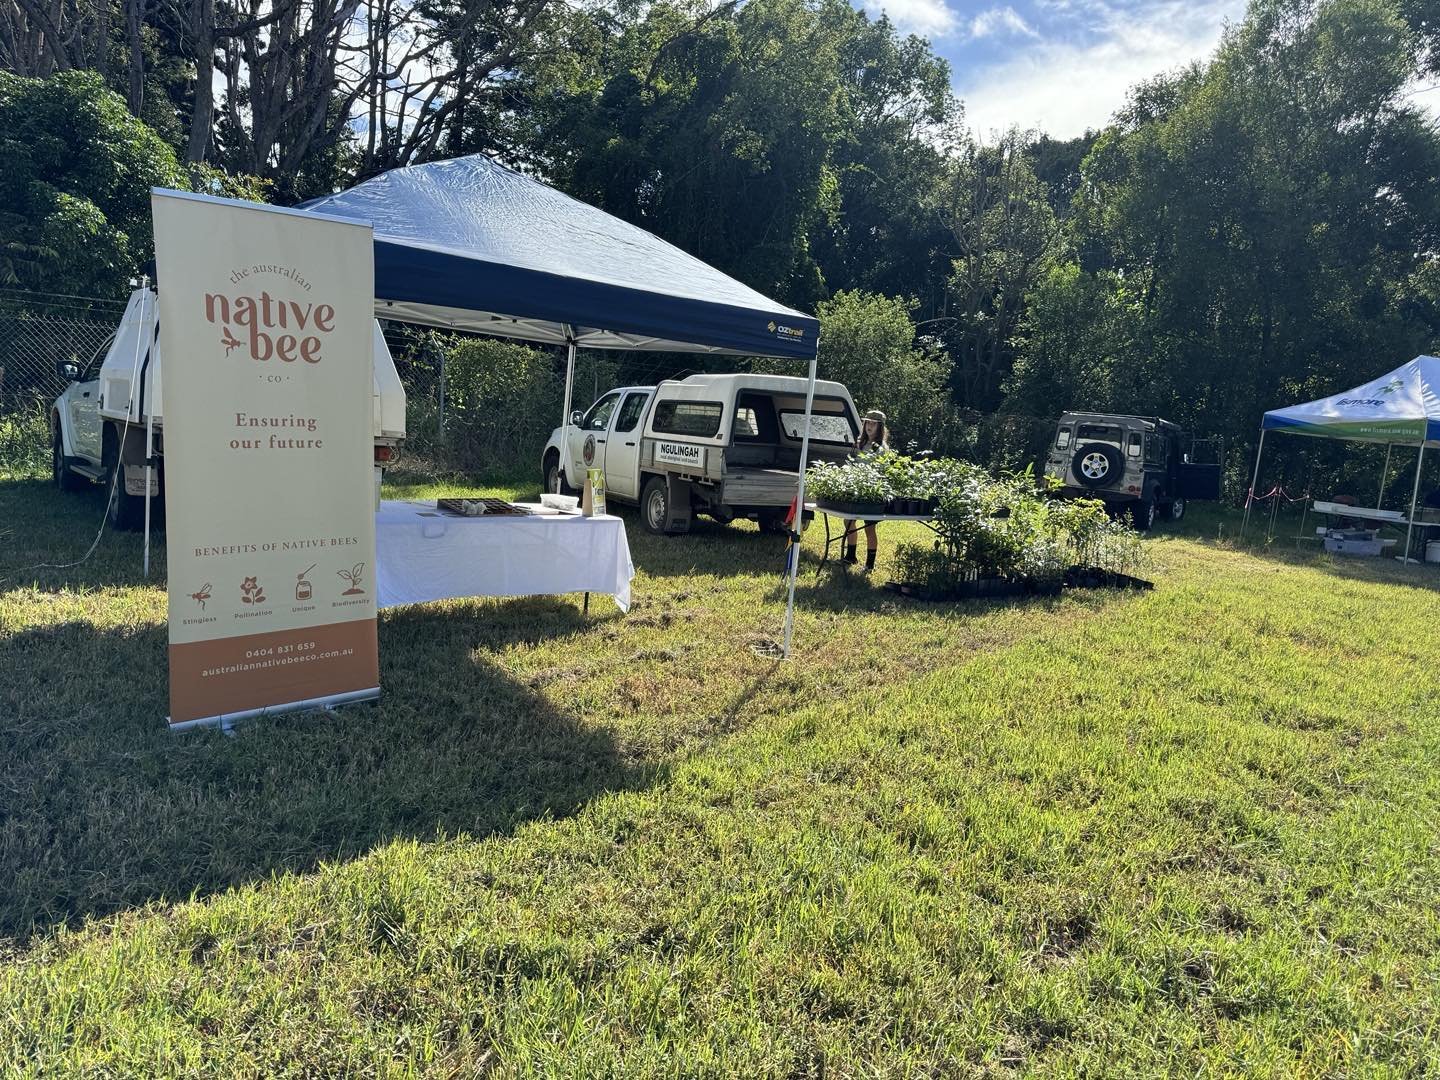 Setting up for the Duck creek Landcare morning. Beautiful day!
#australiannativebees #landcare #nativebees #bees #sunshine #flowers #nature #aussiebees #conservation #buzz